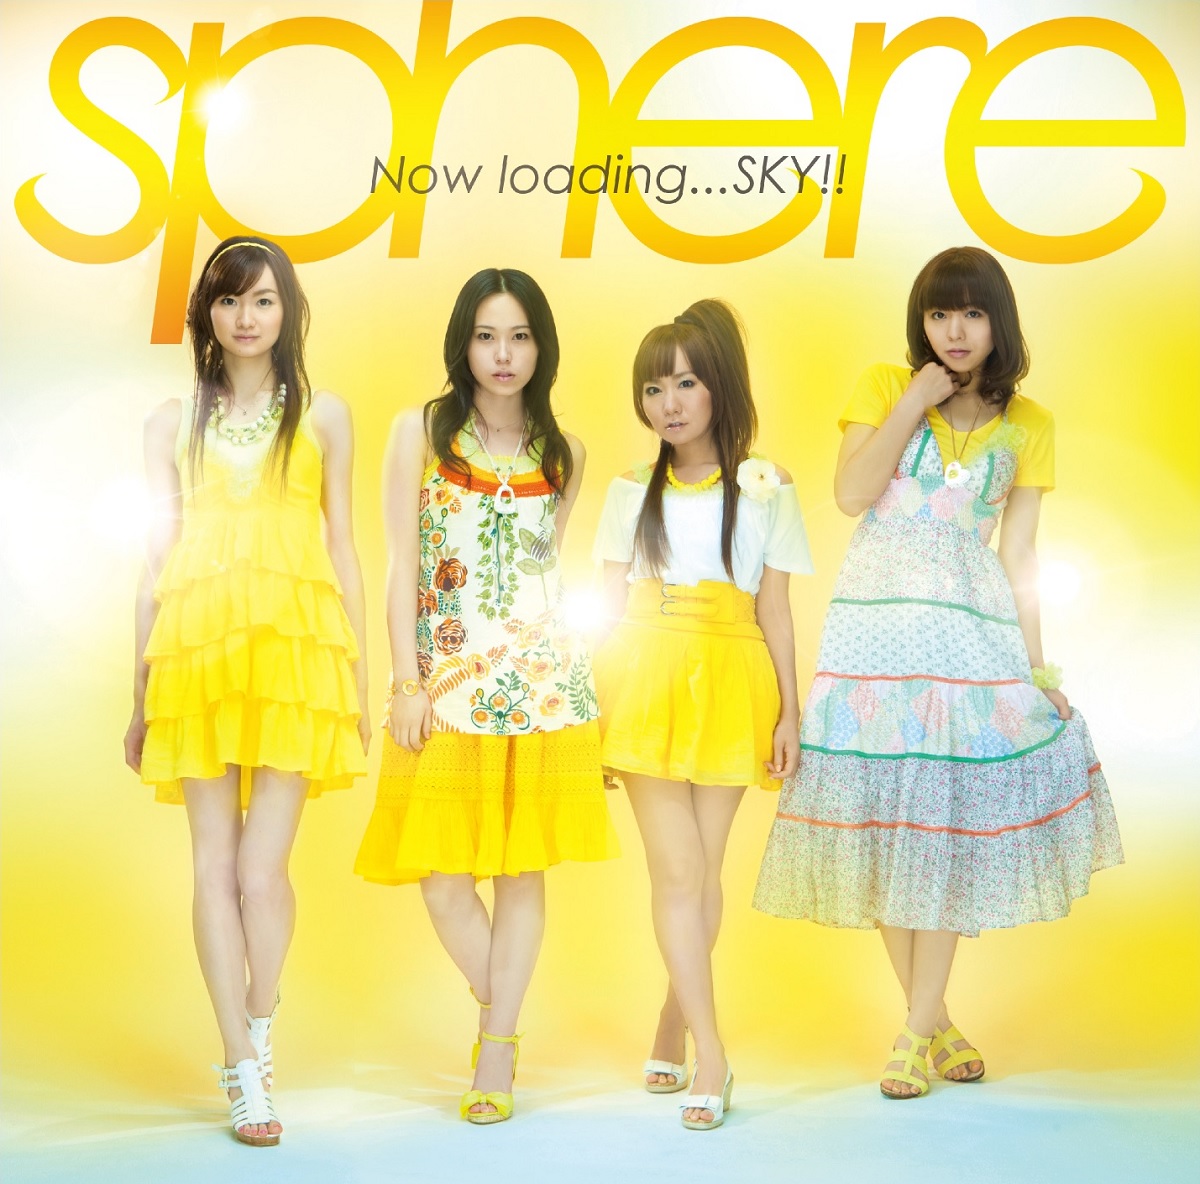 Cover art for『Sphere - Now loading...SKY!!』from the release『Now loading...SKY!!